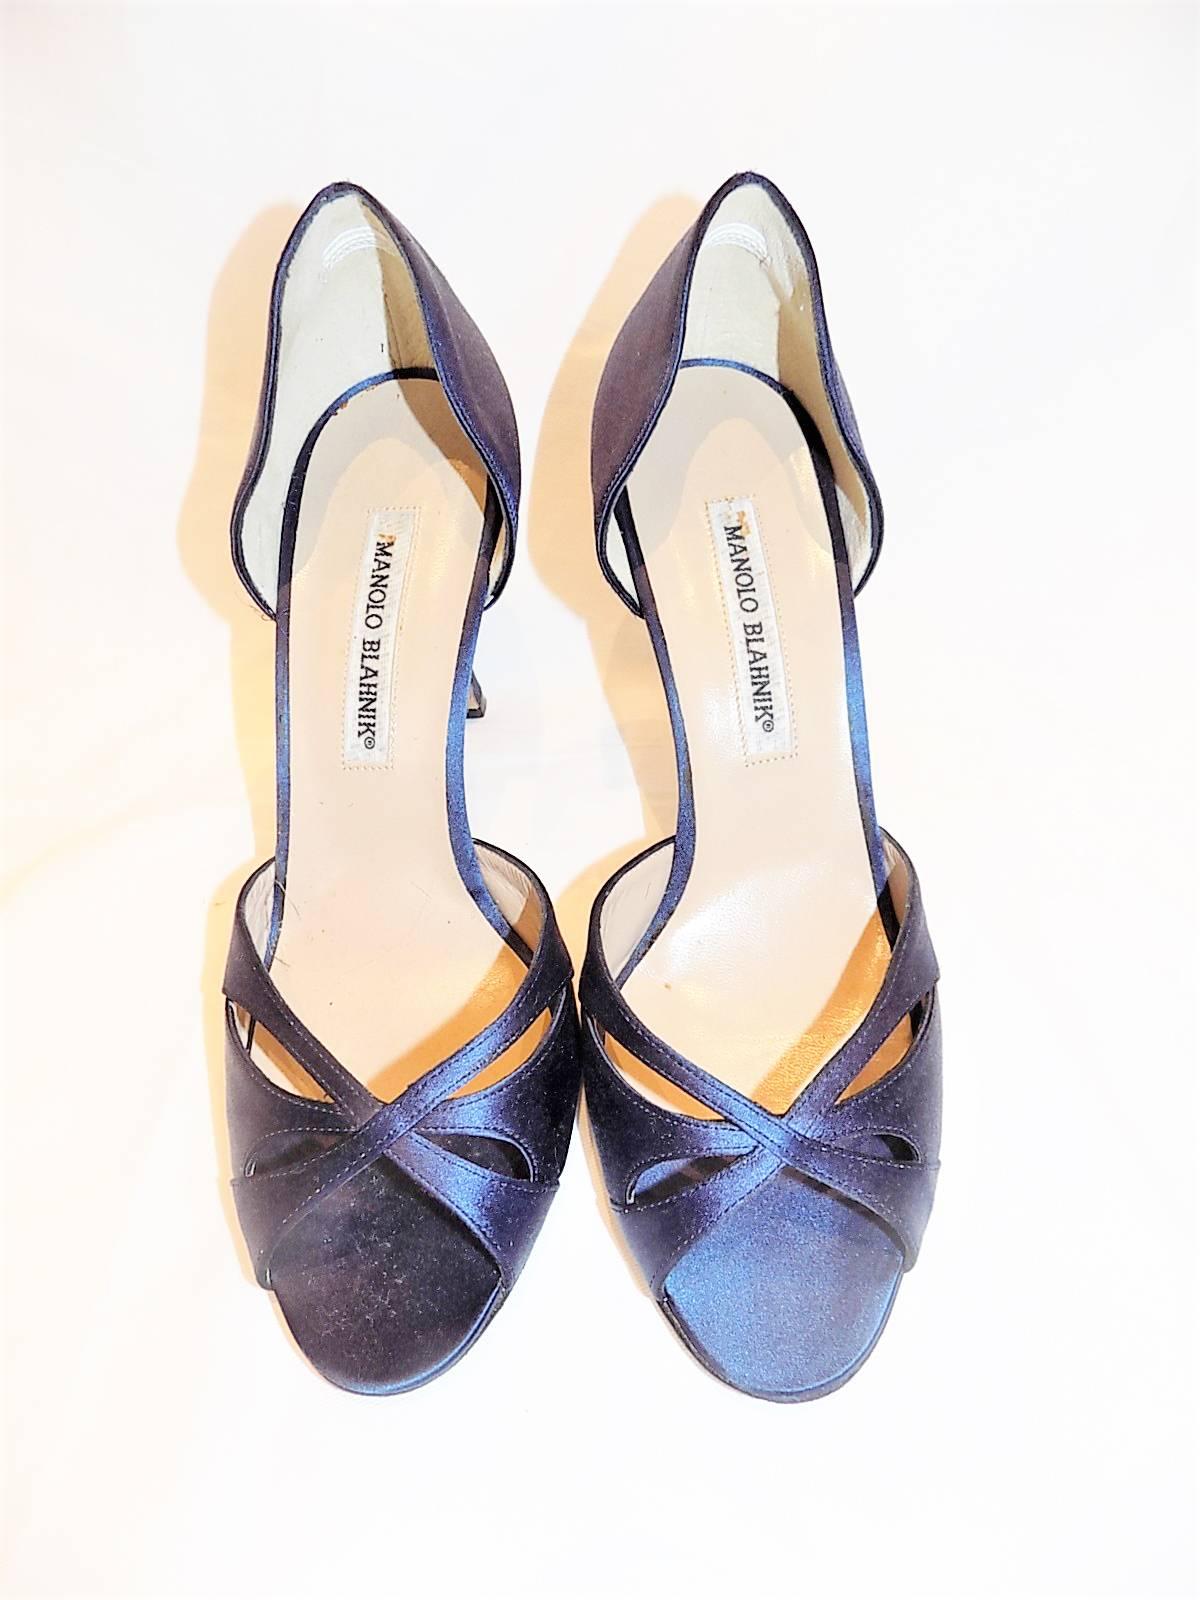 beautiful  Manolo Blahnik navy/ cobalt  blue satin sandals shoes New in size 38. Heel 4 inches.